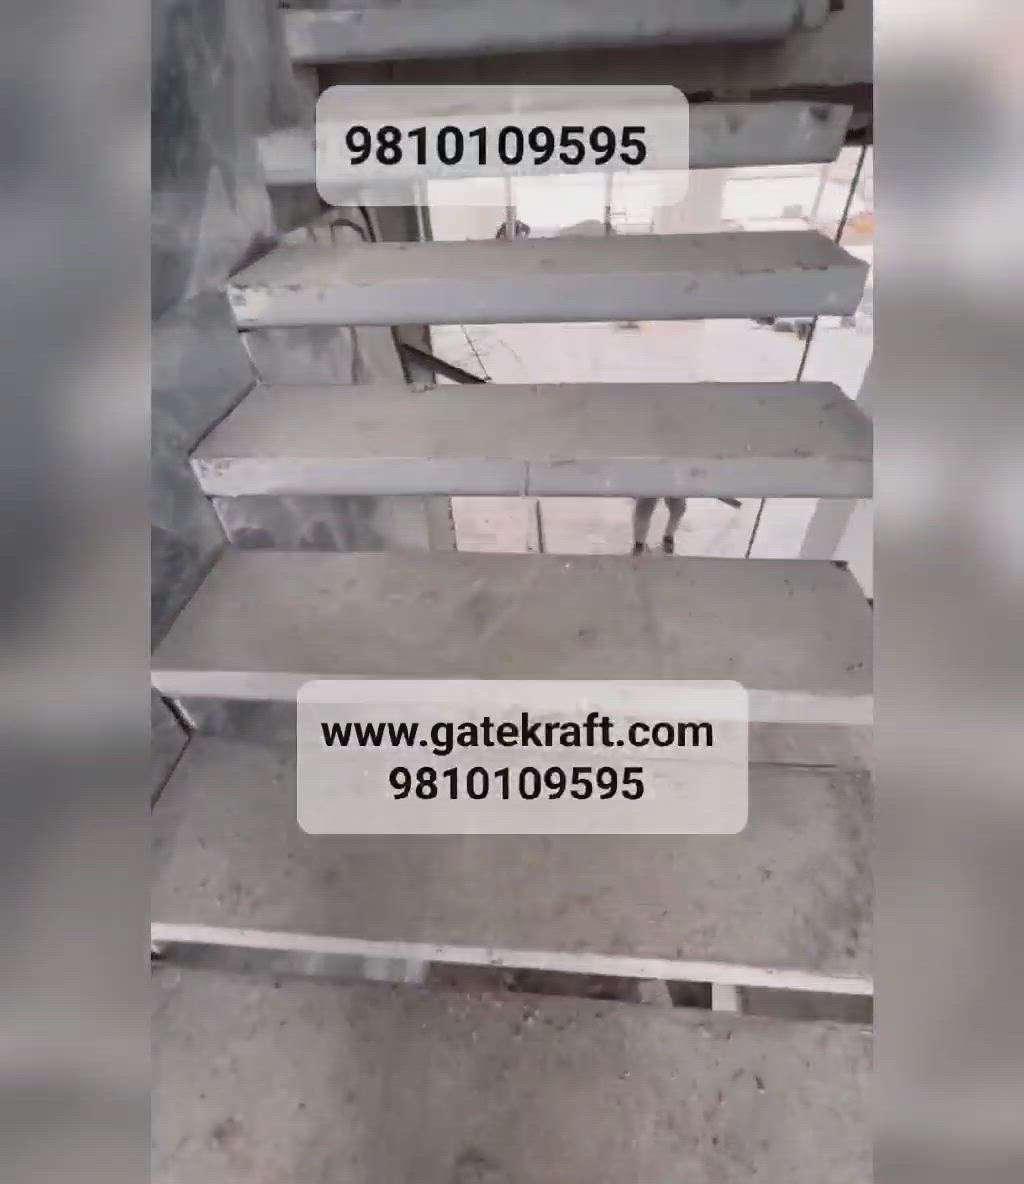 Specialist in this field Floating Duplex iron Staircase making by Gate kraft #floatingstaircase #ironstairs #ironstaircase #duplexstaircase #ironstair #gatekraft #Architect